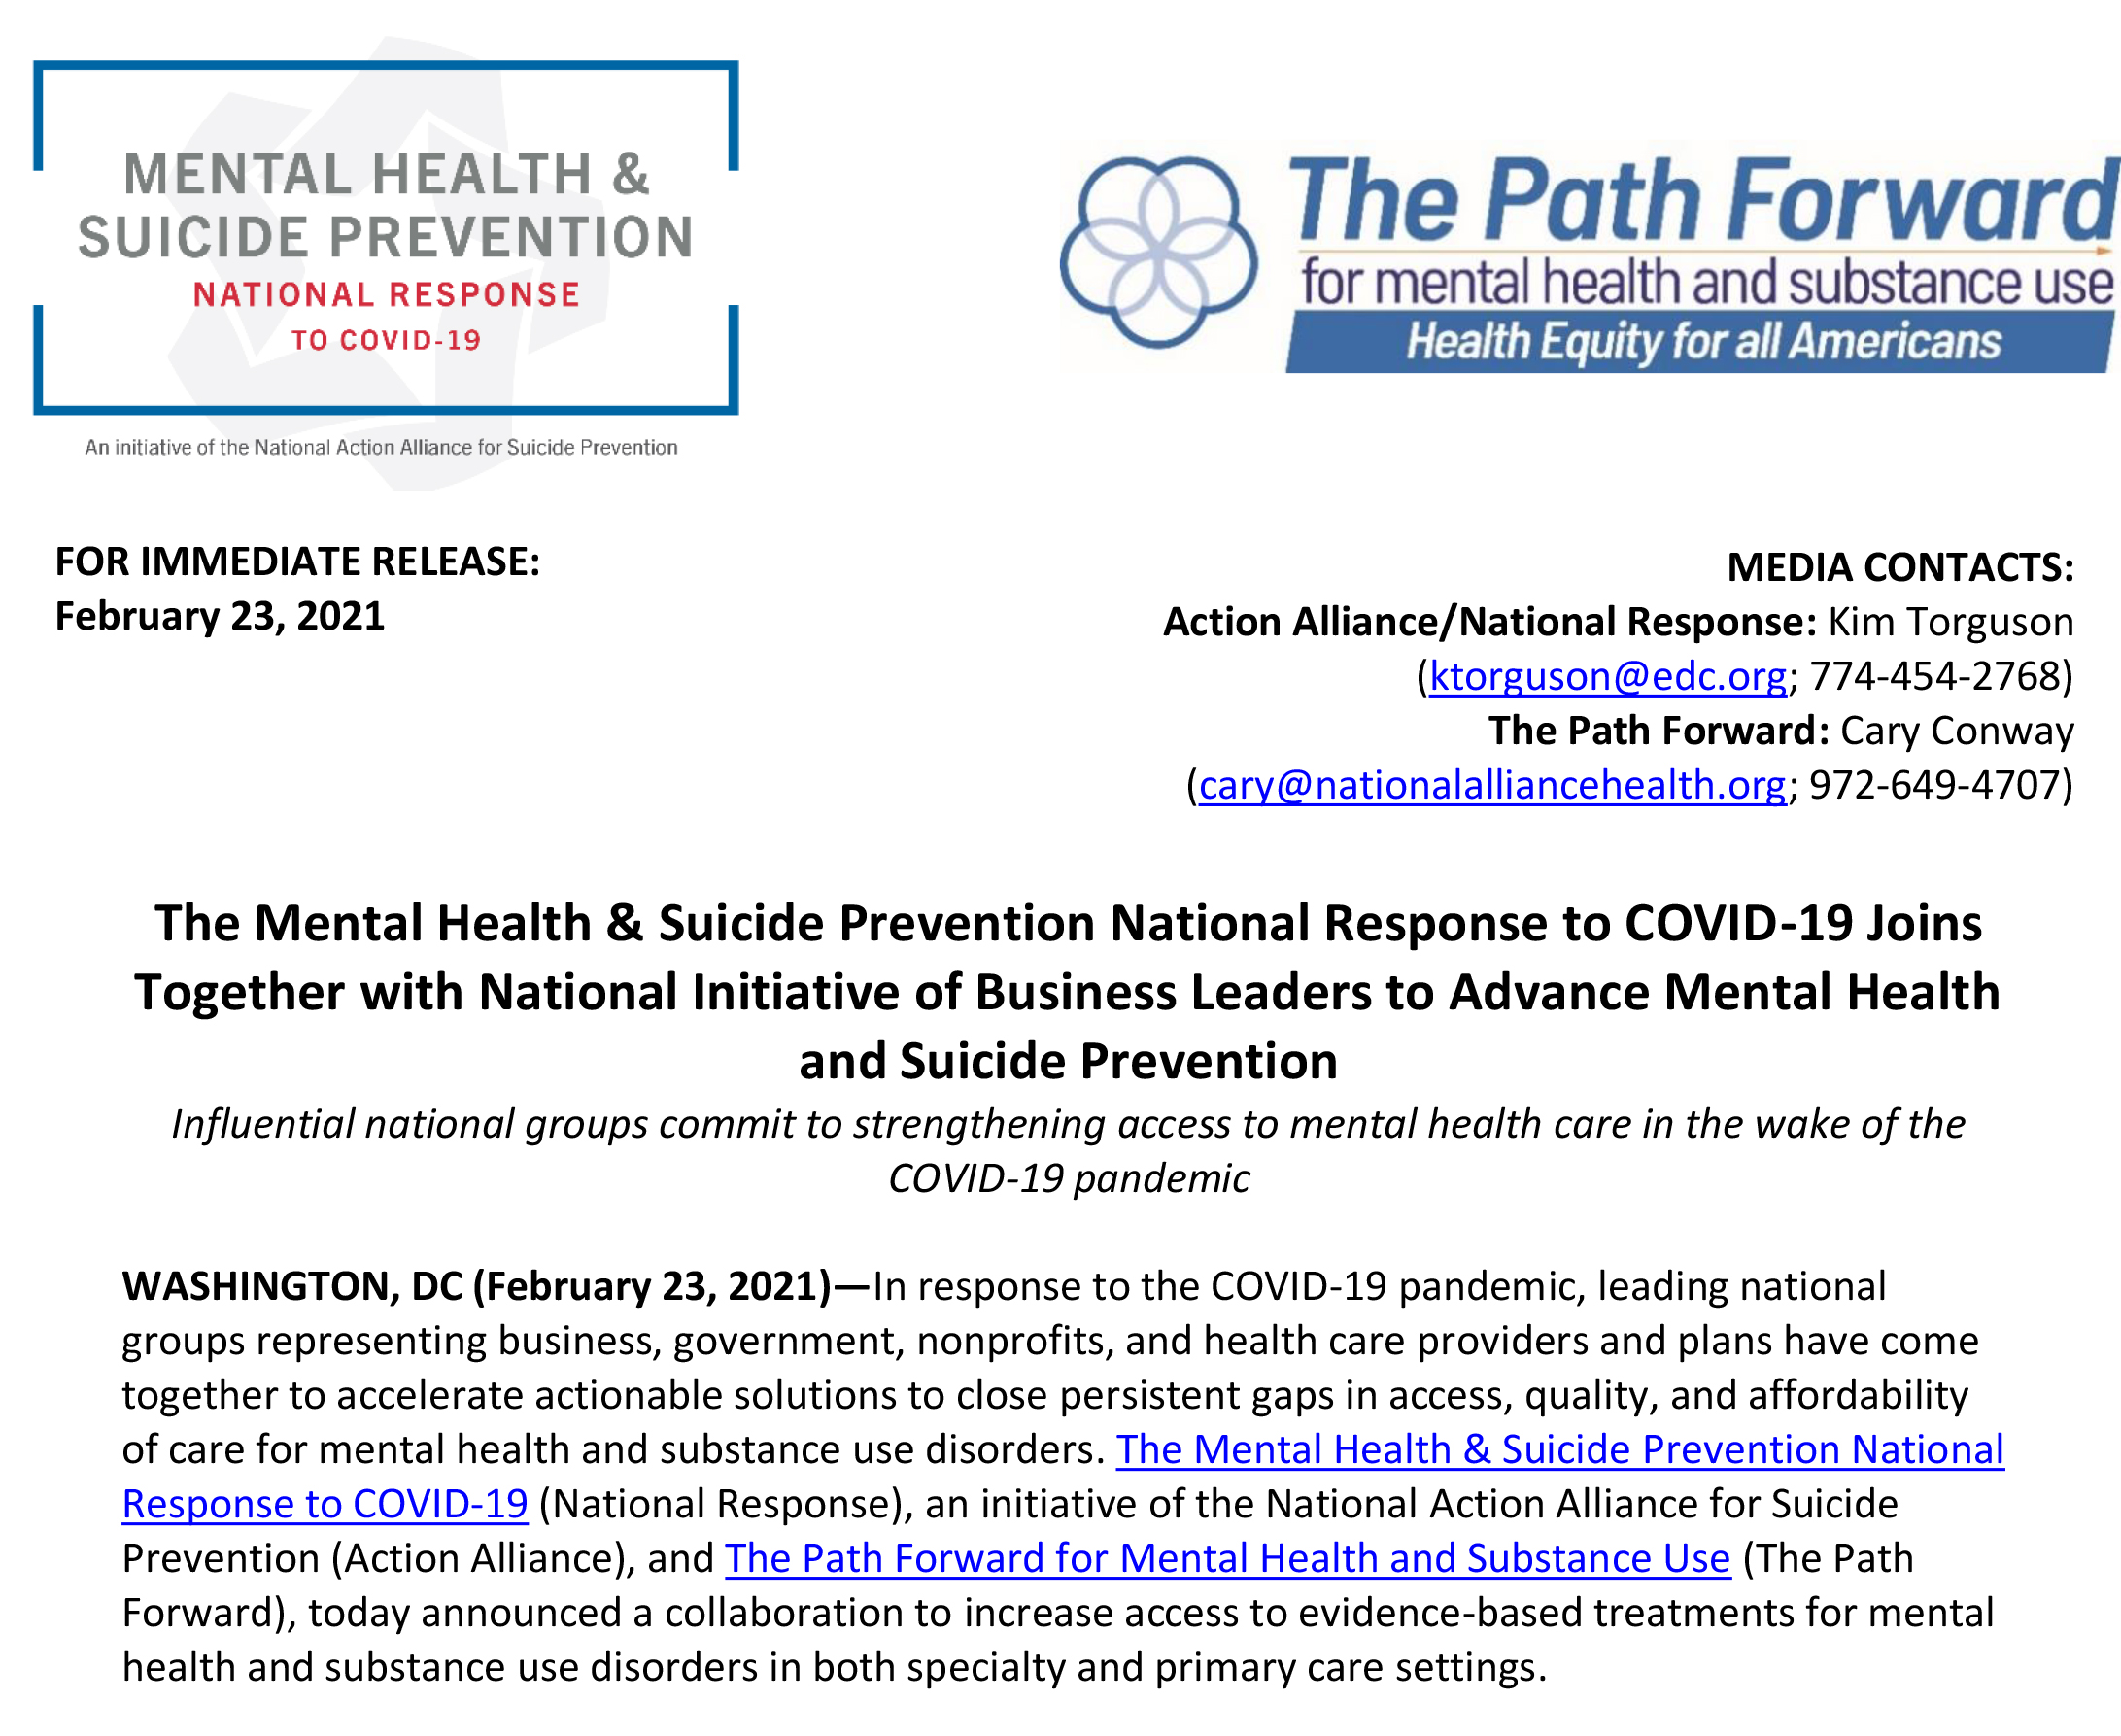 The Mental Health & Suicide Prevention National Response to COVID-19 Joins Together with National Initiative of Business Leaders to Advance Mental Health and Suicide Prevention 